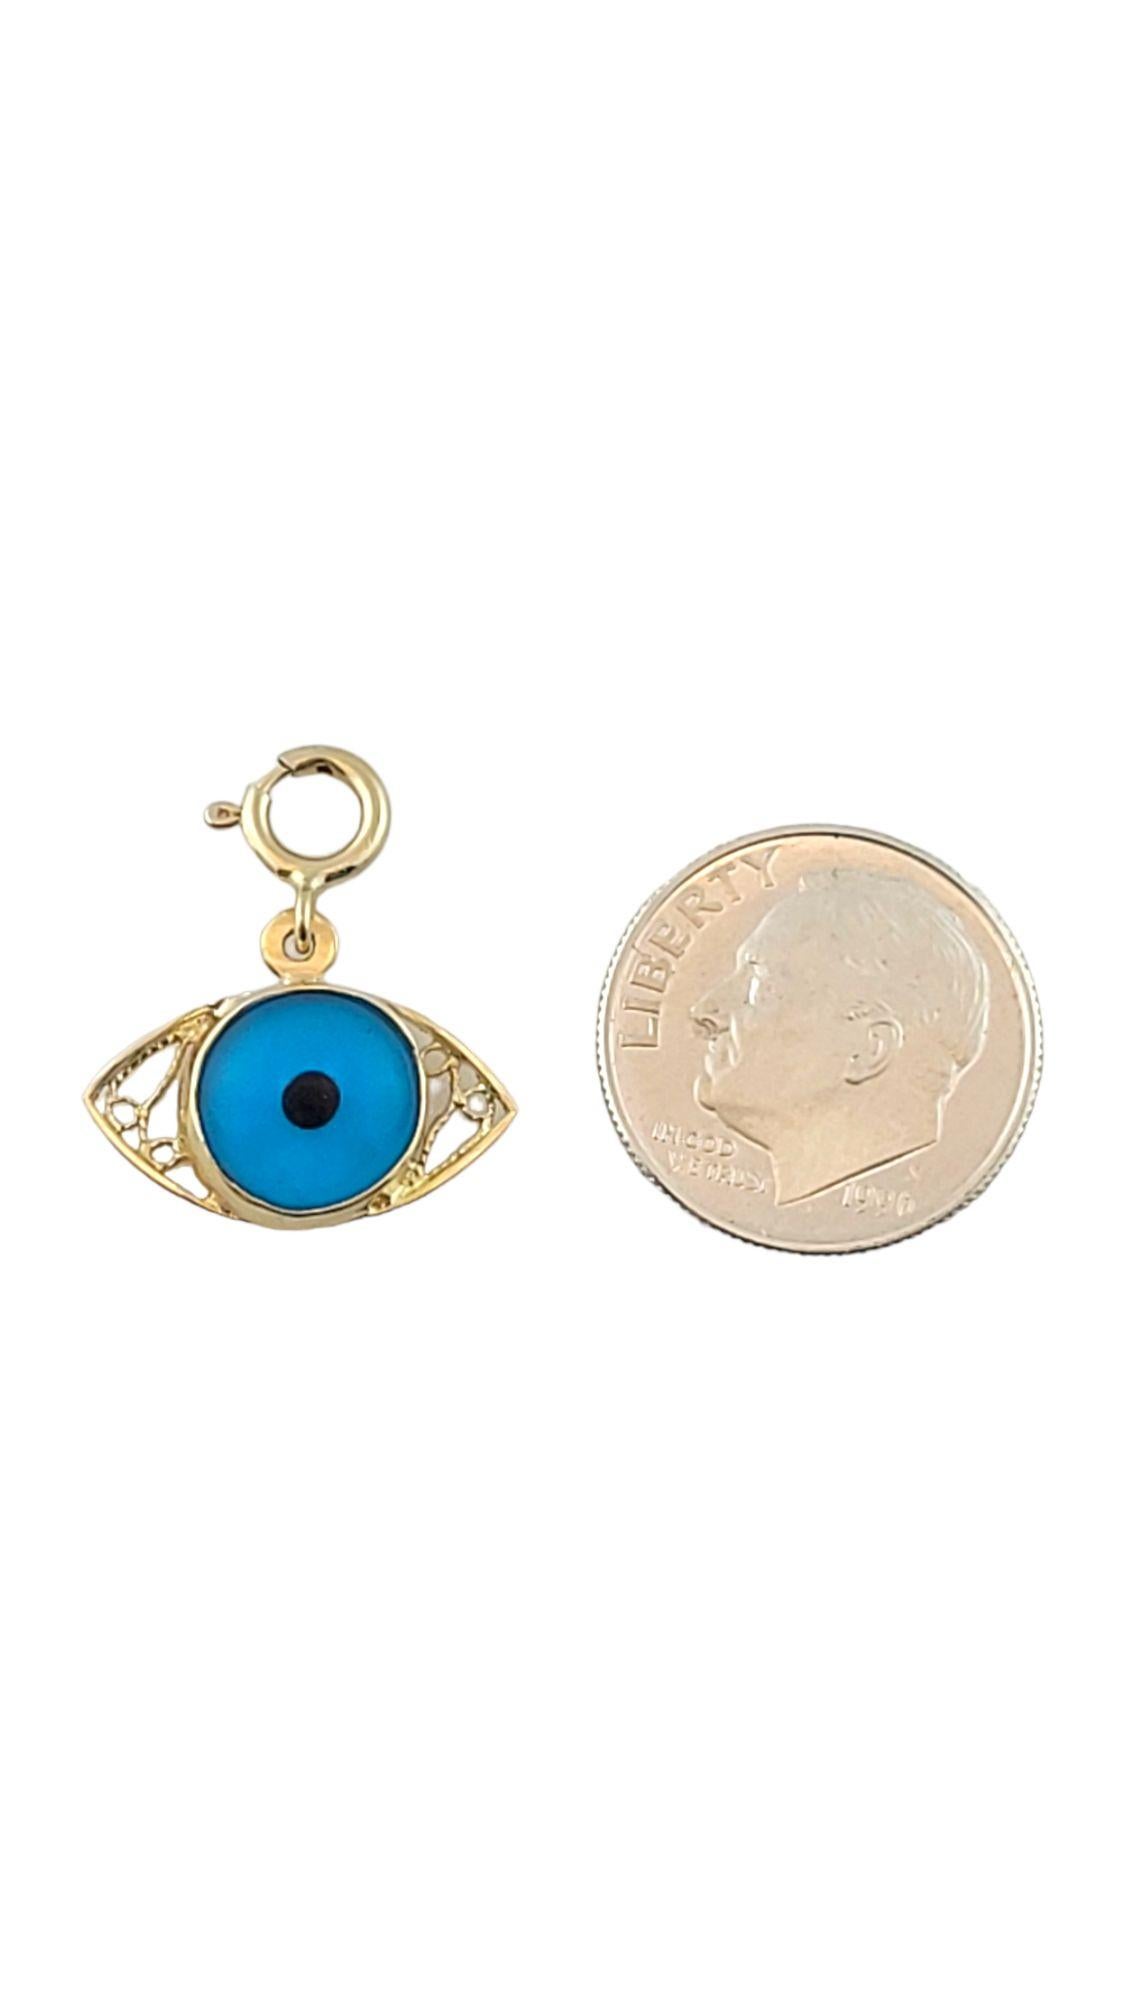 Ward off evil spirits with this beautiful evil eye charm!

Size: 17.5 mm X 13.2 mm

Weight: 1.3 g/ 0.8 dwt

Hallmark: AR 14K

Very good condition, professionally polished.

Will come packaged in a gift box or pouch (when possible) and will be